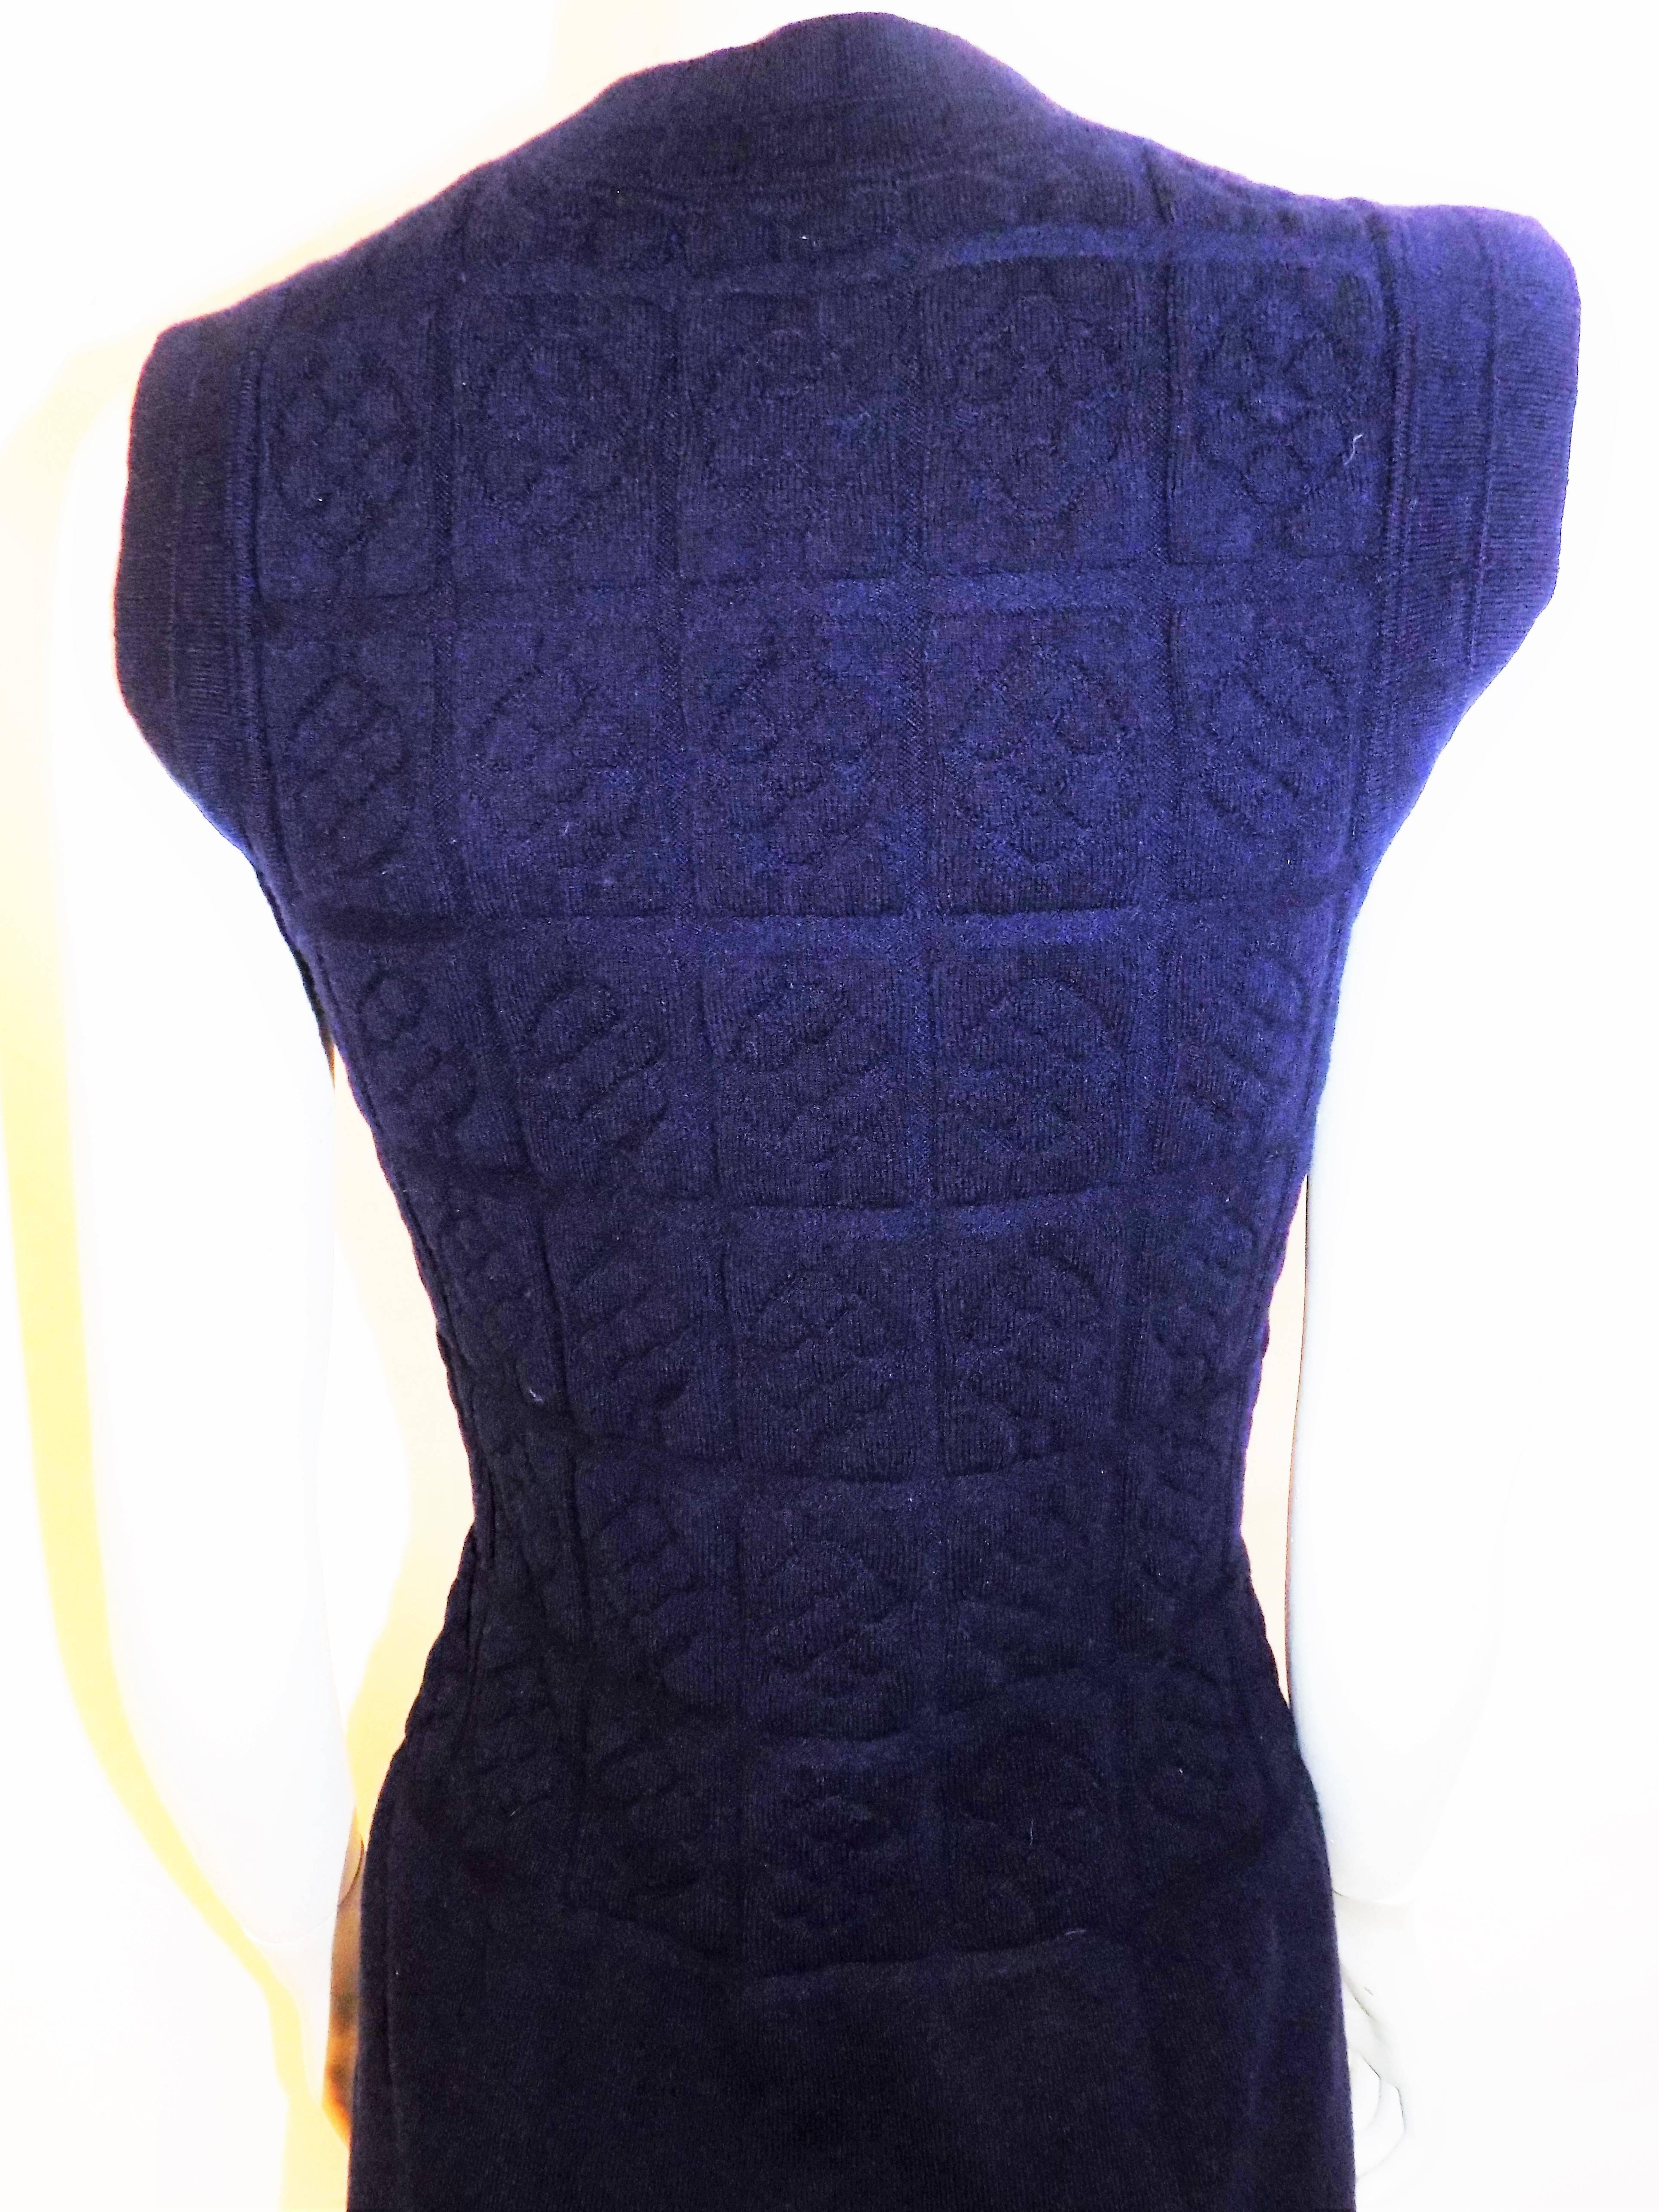 Chanel raise/ quilted knit navy dress and jacket with Lesage patch 3